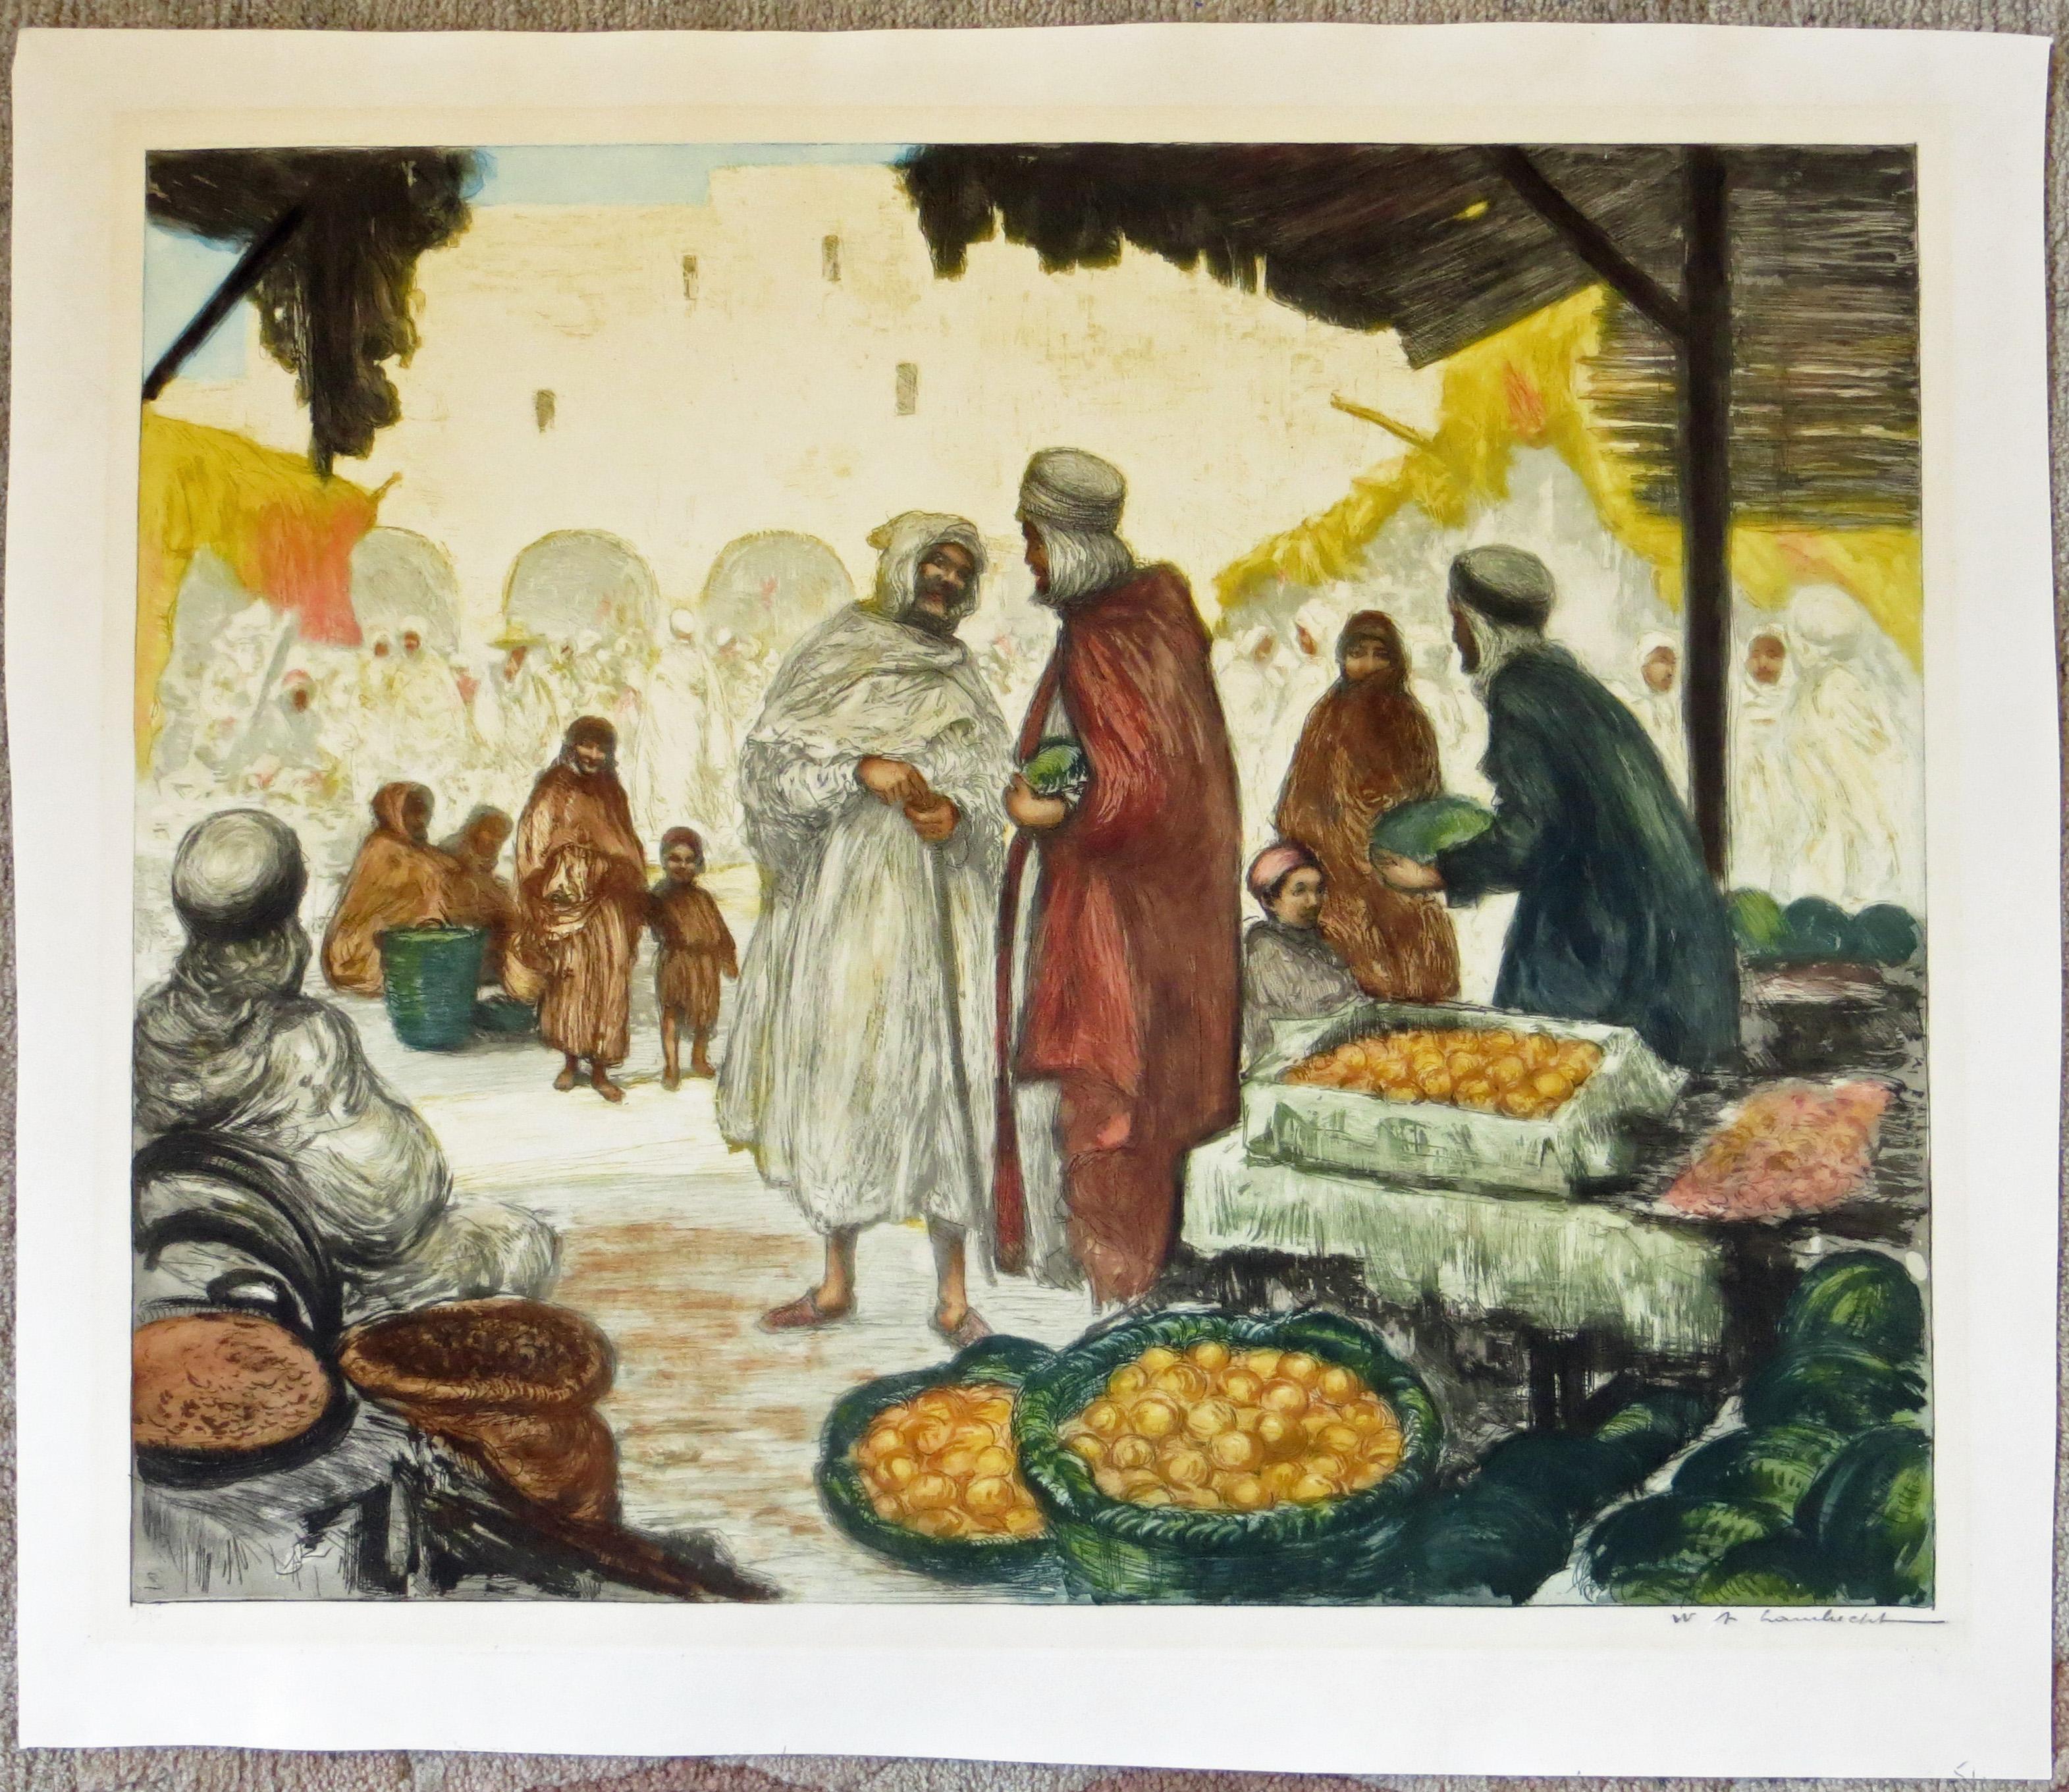 Hand colored Etching - Souk a’ Gabes Tunisia - Print by WILLIAM ADOLPHE LAMBRECHT